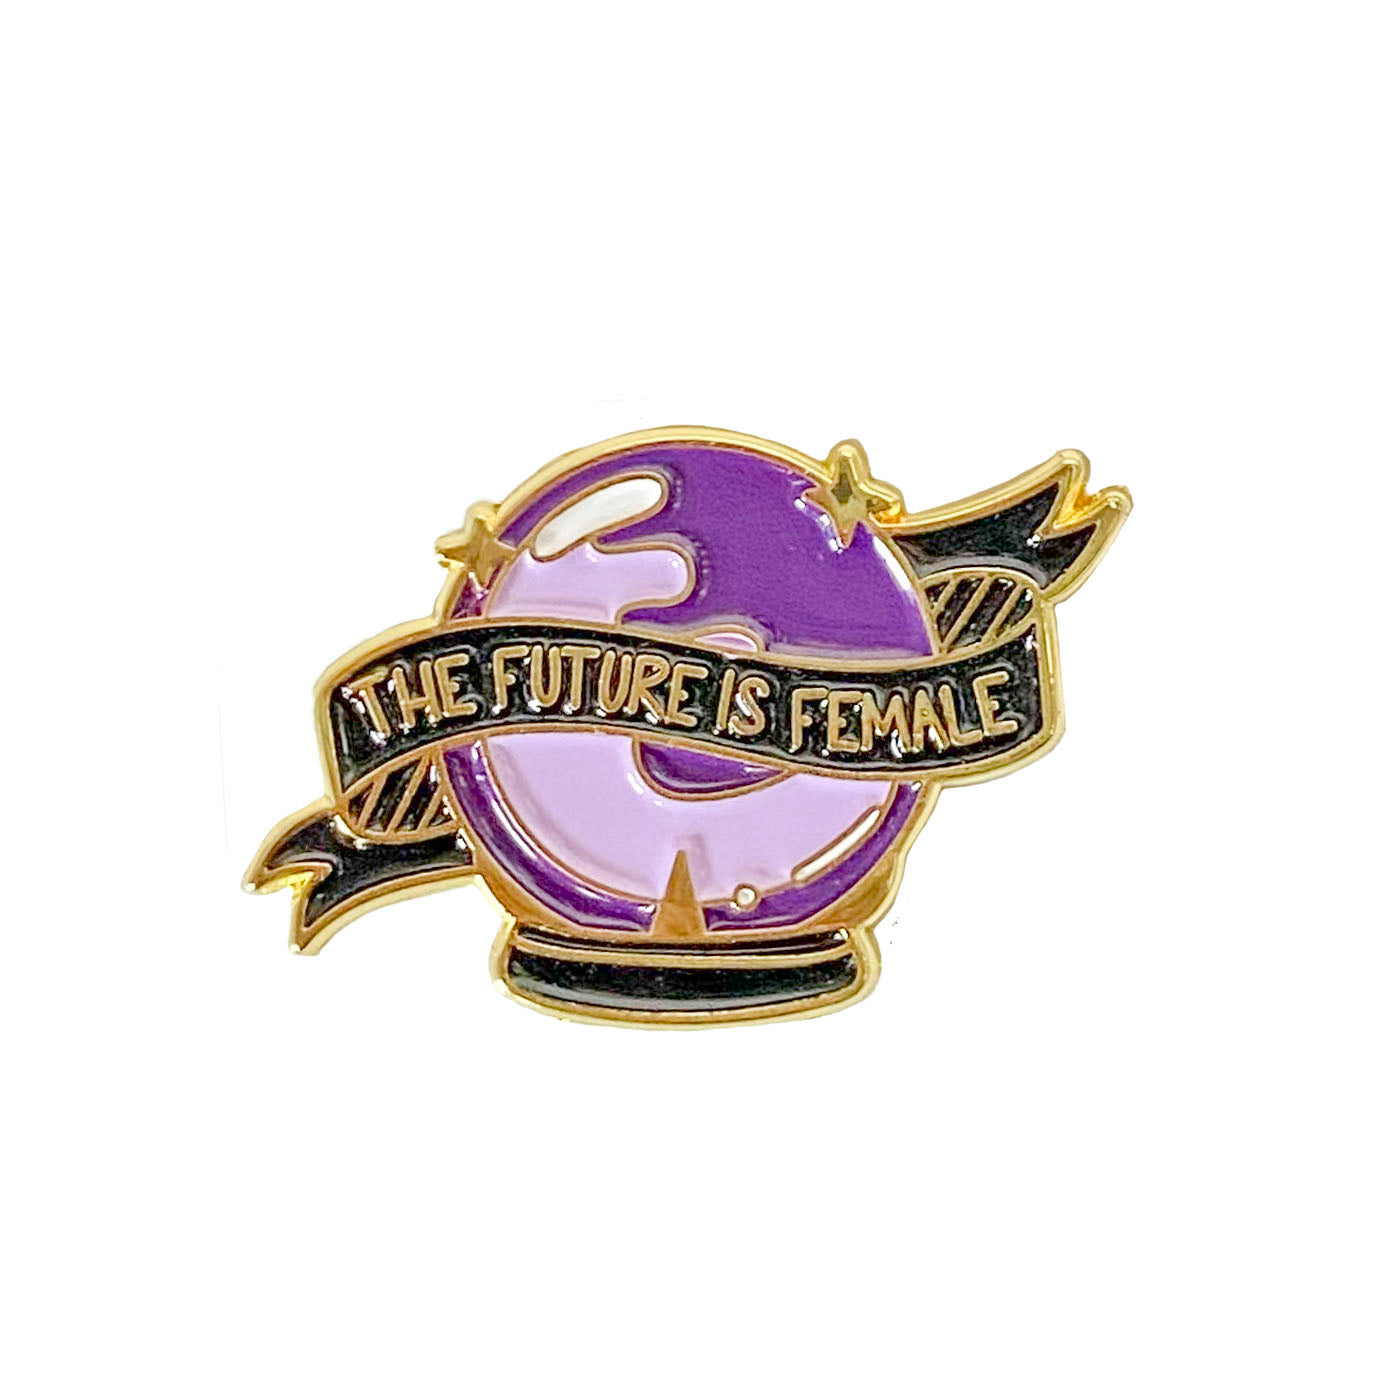 The Future Is Female Pin